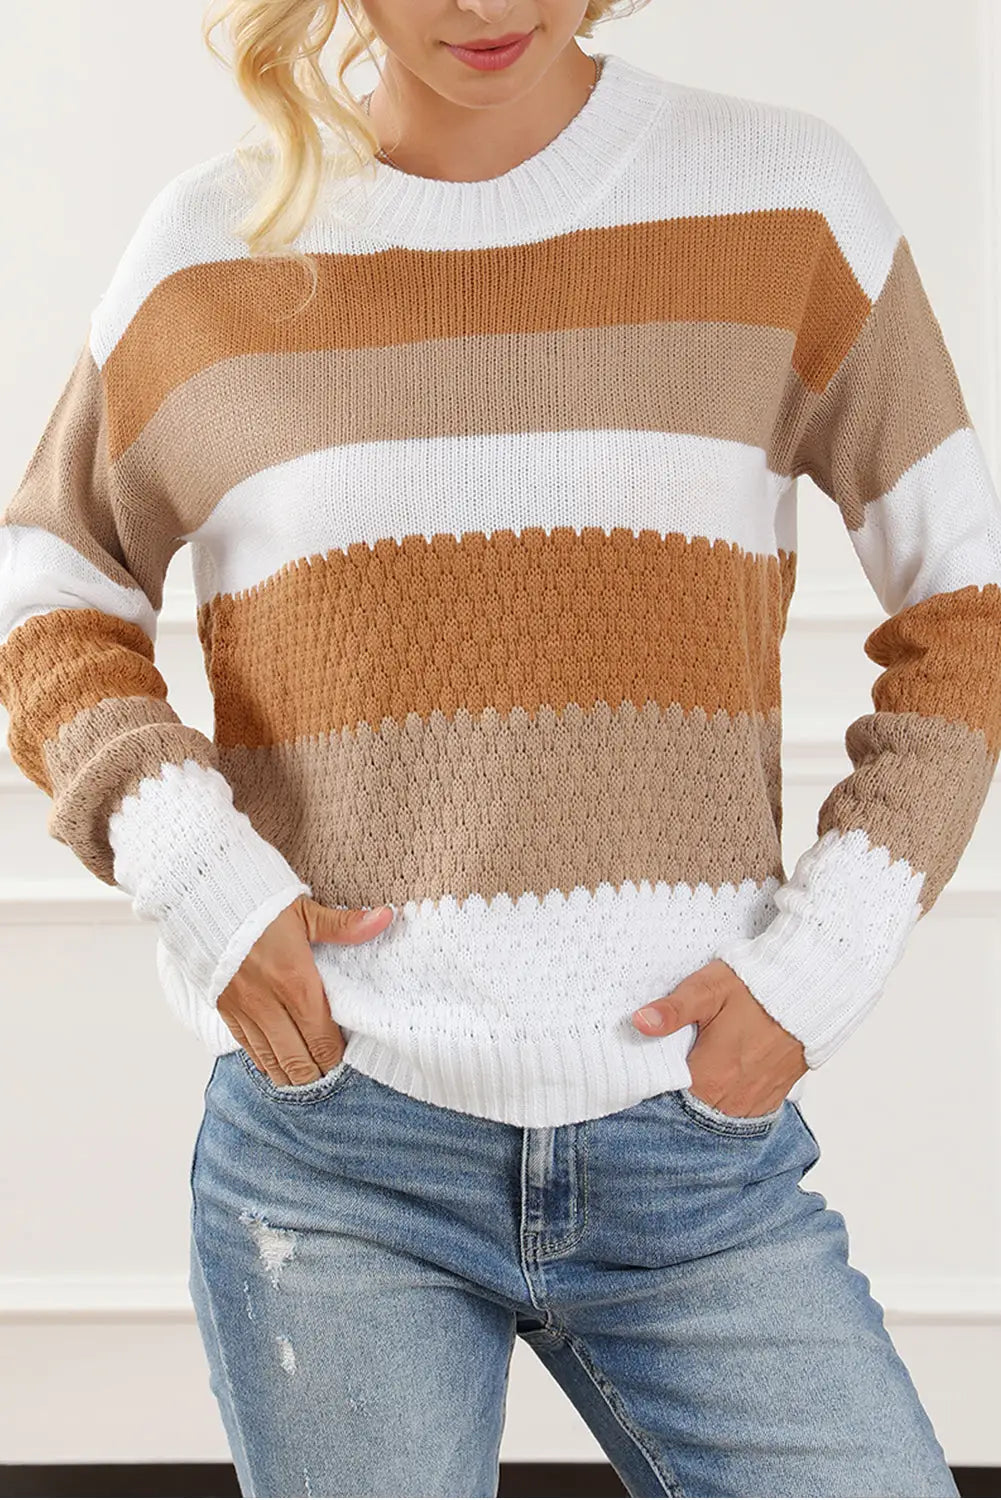 Red stripe cable knit drop shoulder sweater - chestnut / l / 100% acrylic - sweaters & cardigans